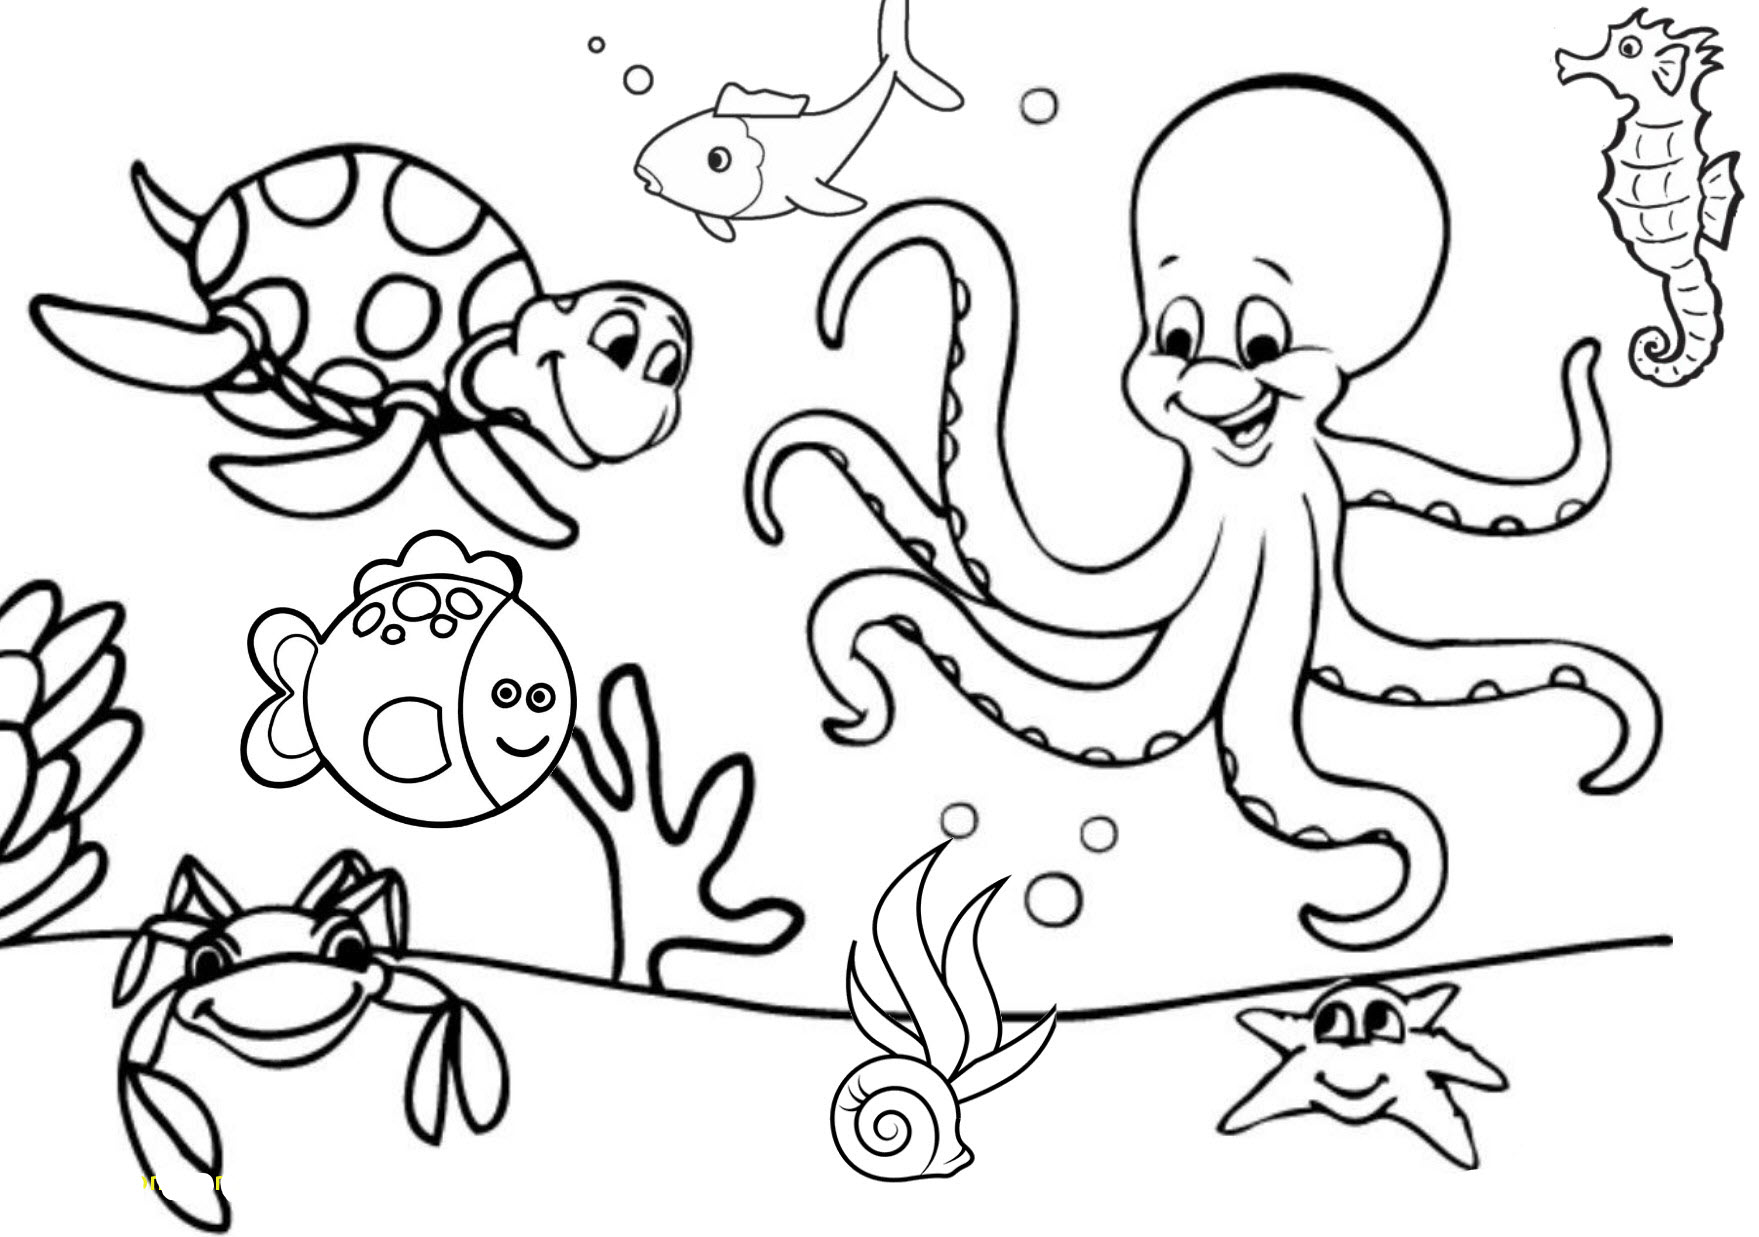 Water Animal Coloring Page